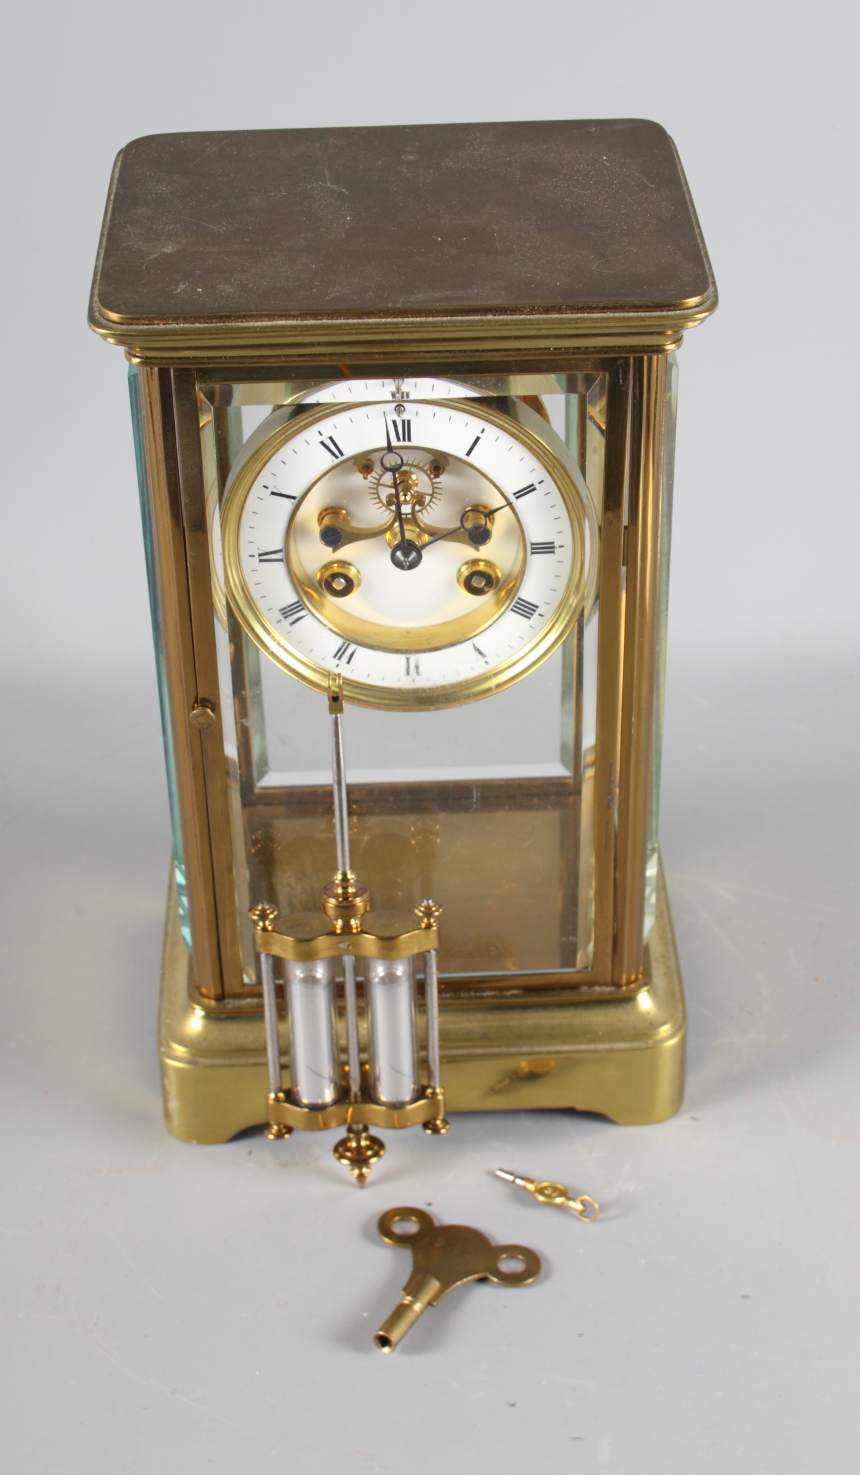 A 19th Century brass cased four-glass clock with white enamel dial and striking movement, 10 1/2" - Image 7 of 8